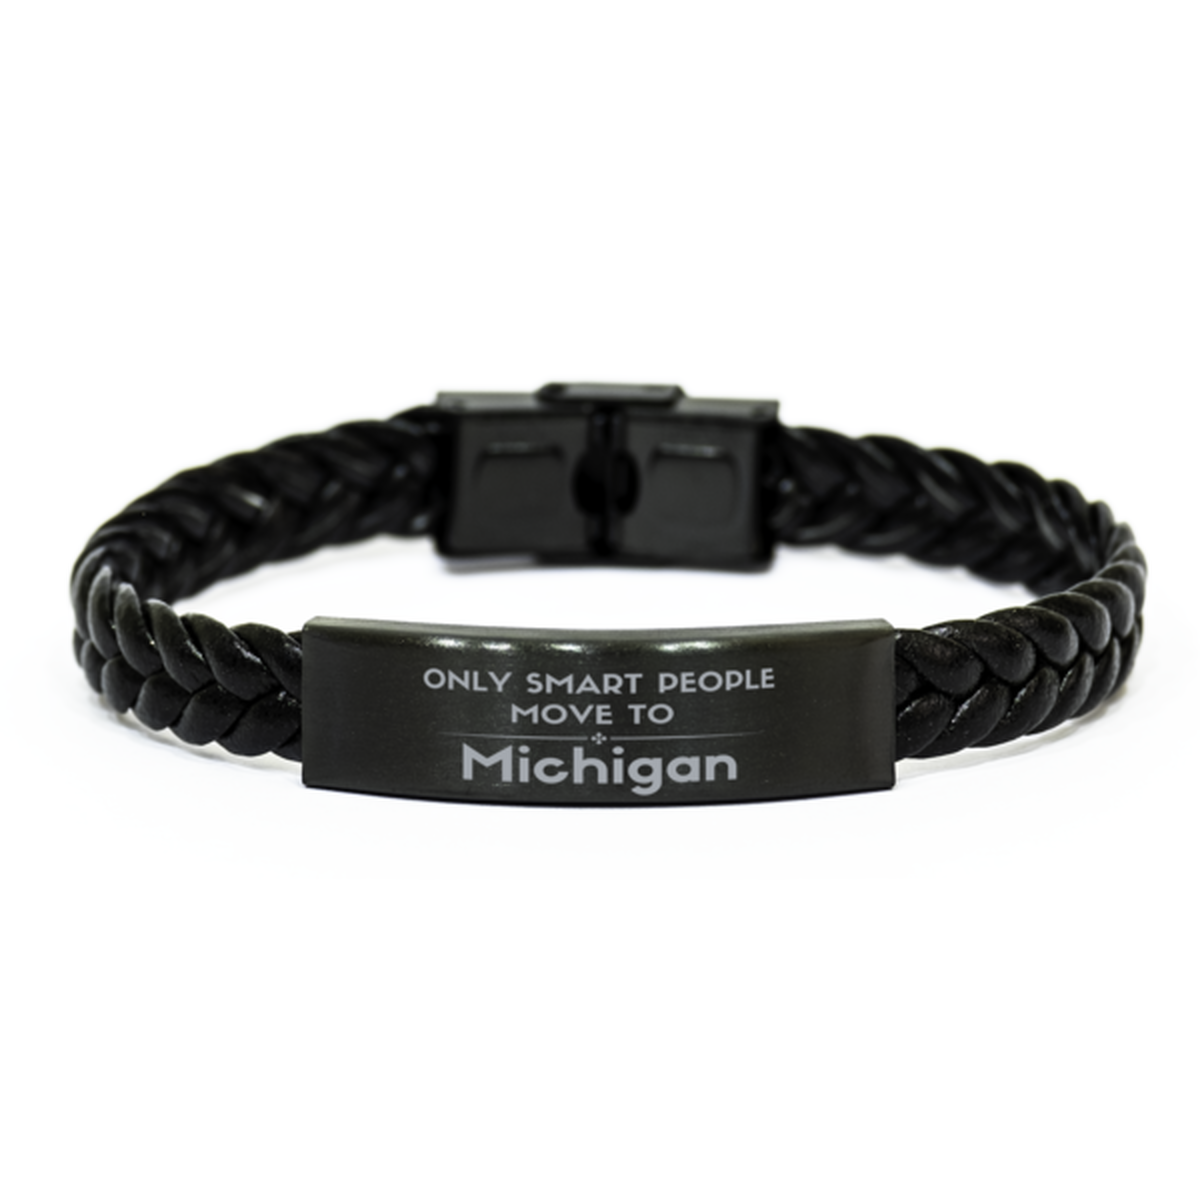 Only smart people move to Michigan Braided Leather Bracelet, Gag Gifts For Michigan, Move to Michigan Gifts for Friends Coworker Funny Saying Quote